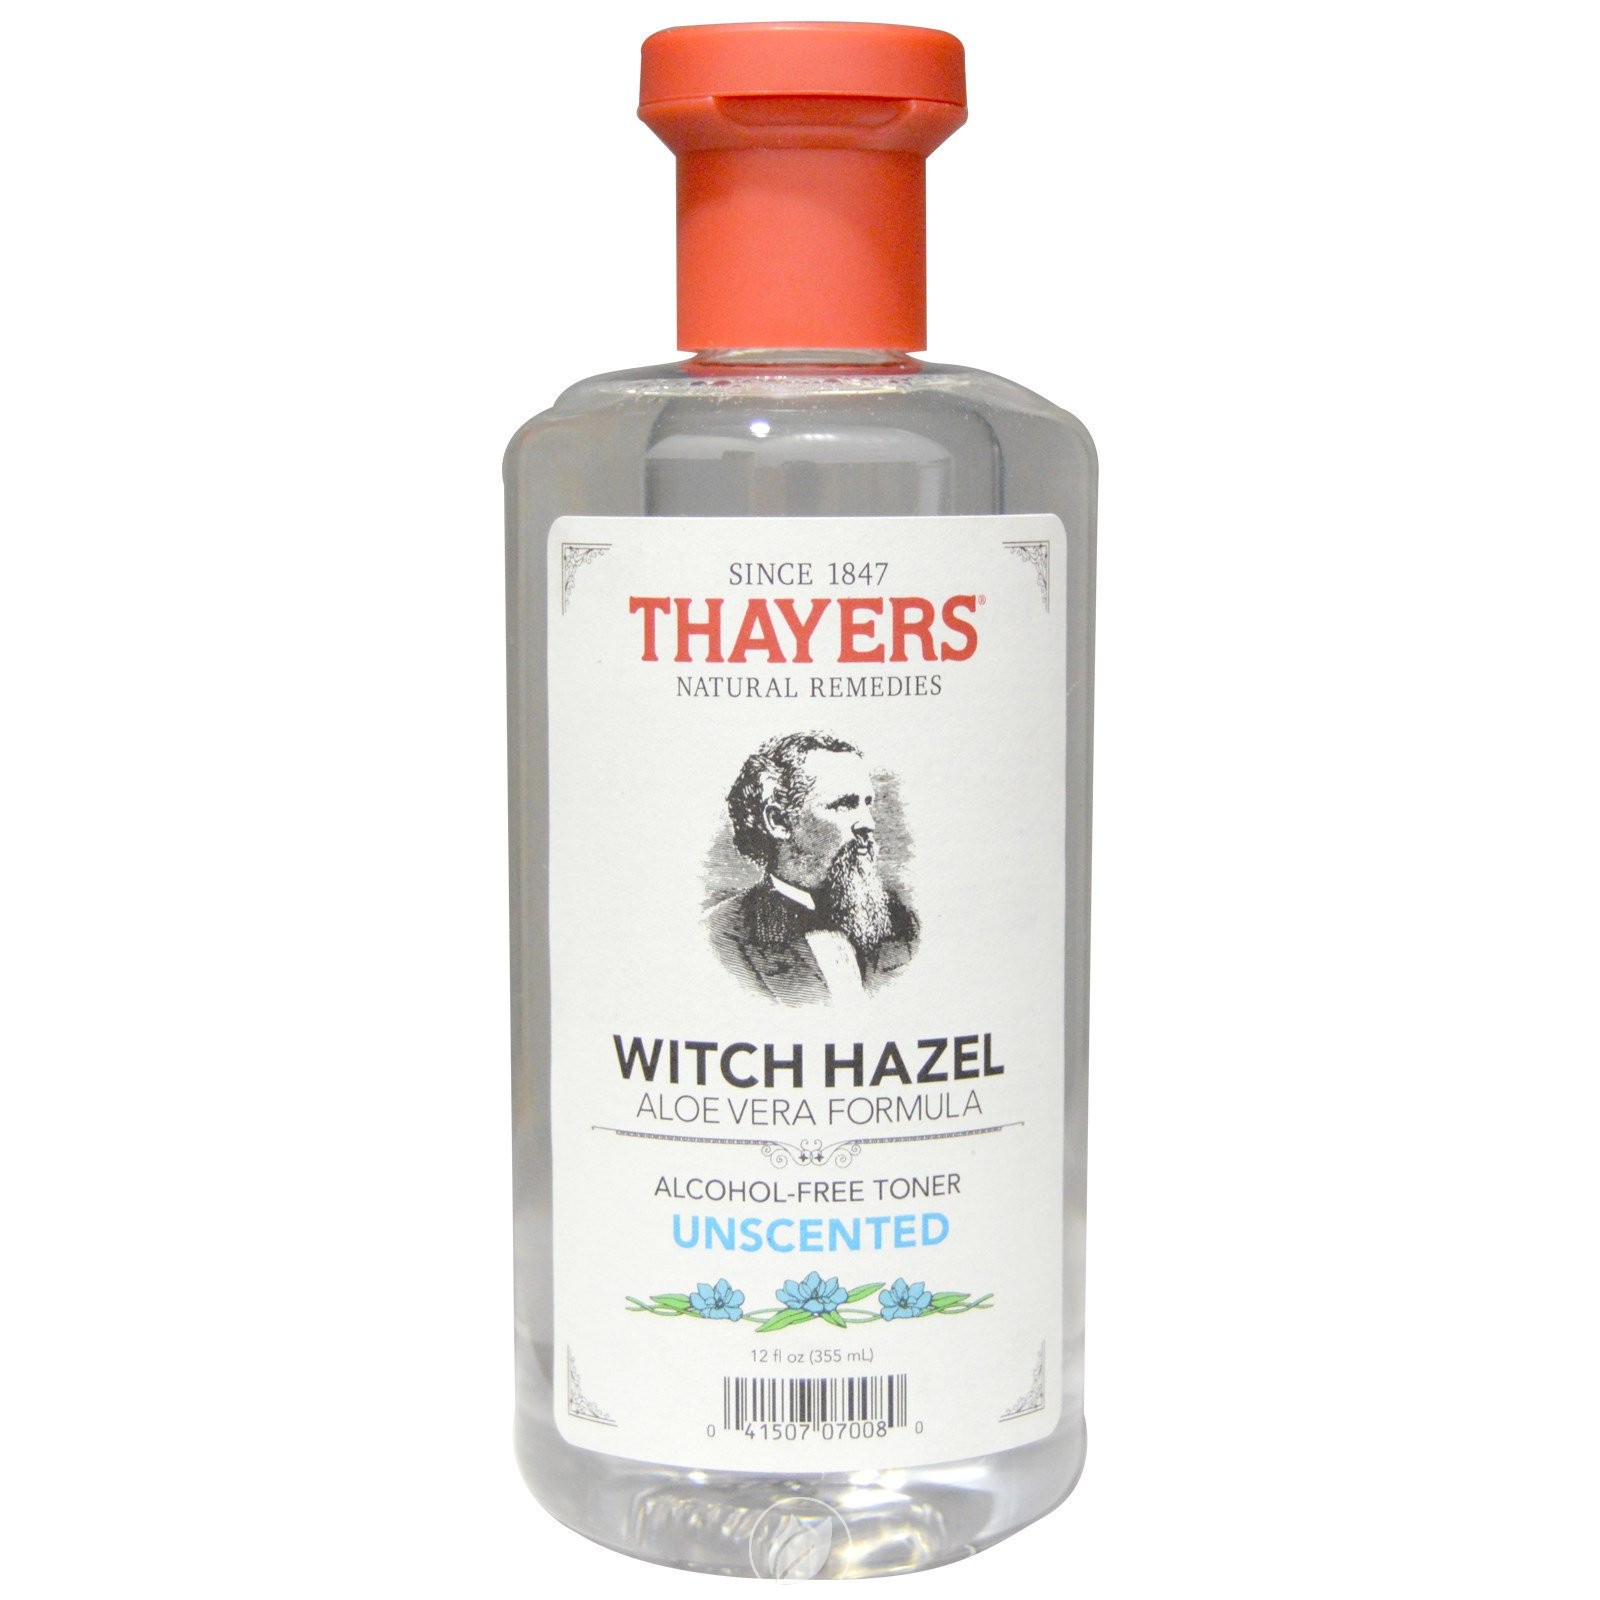 Thayers Alcohol Free Unscented Witch Hazel Toner w/Aloe 12 Ounce - image 1 of 2